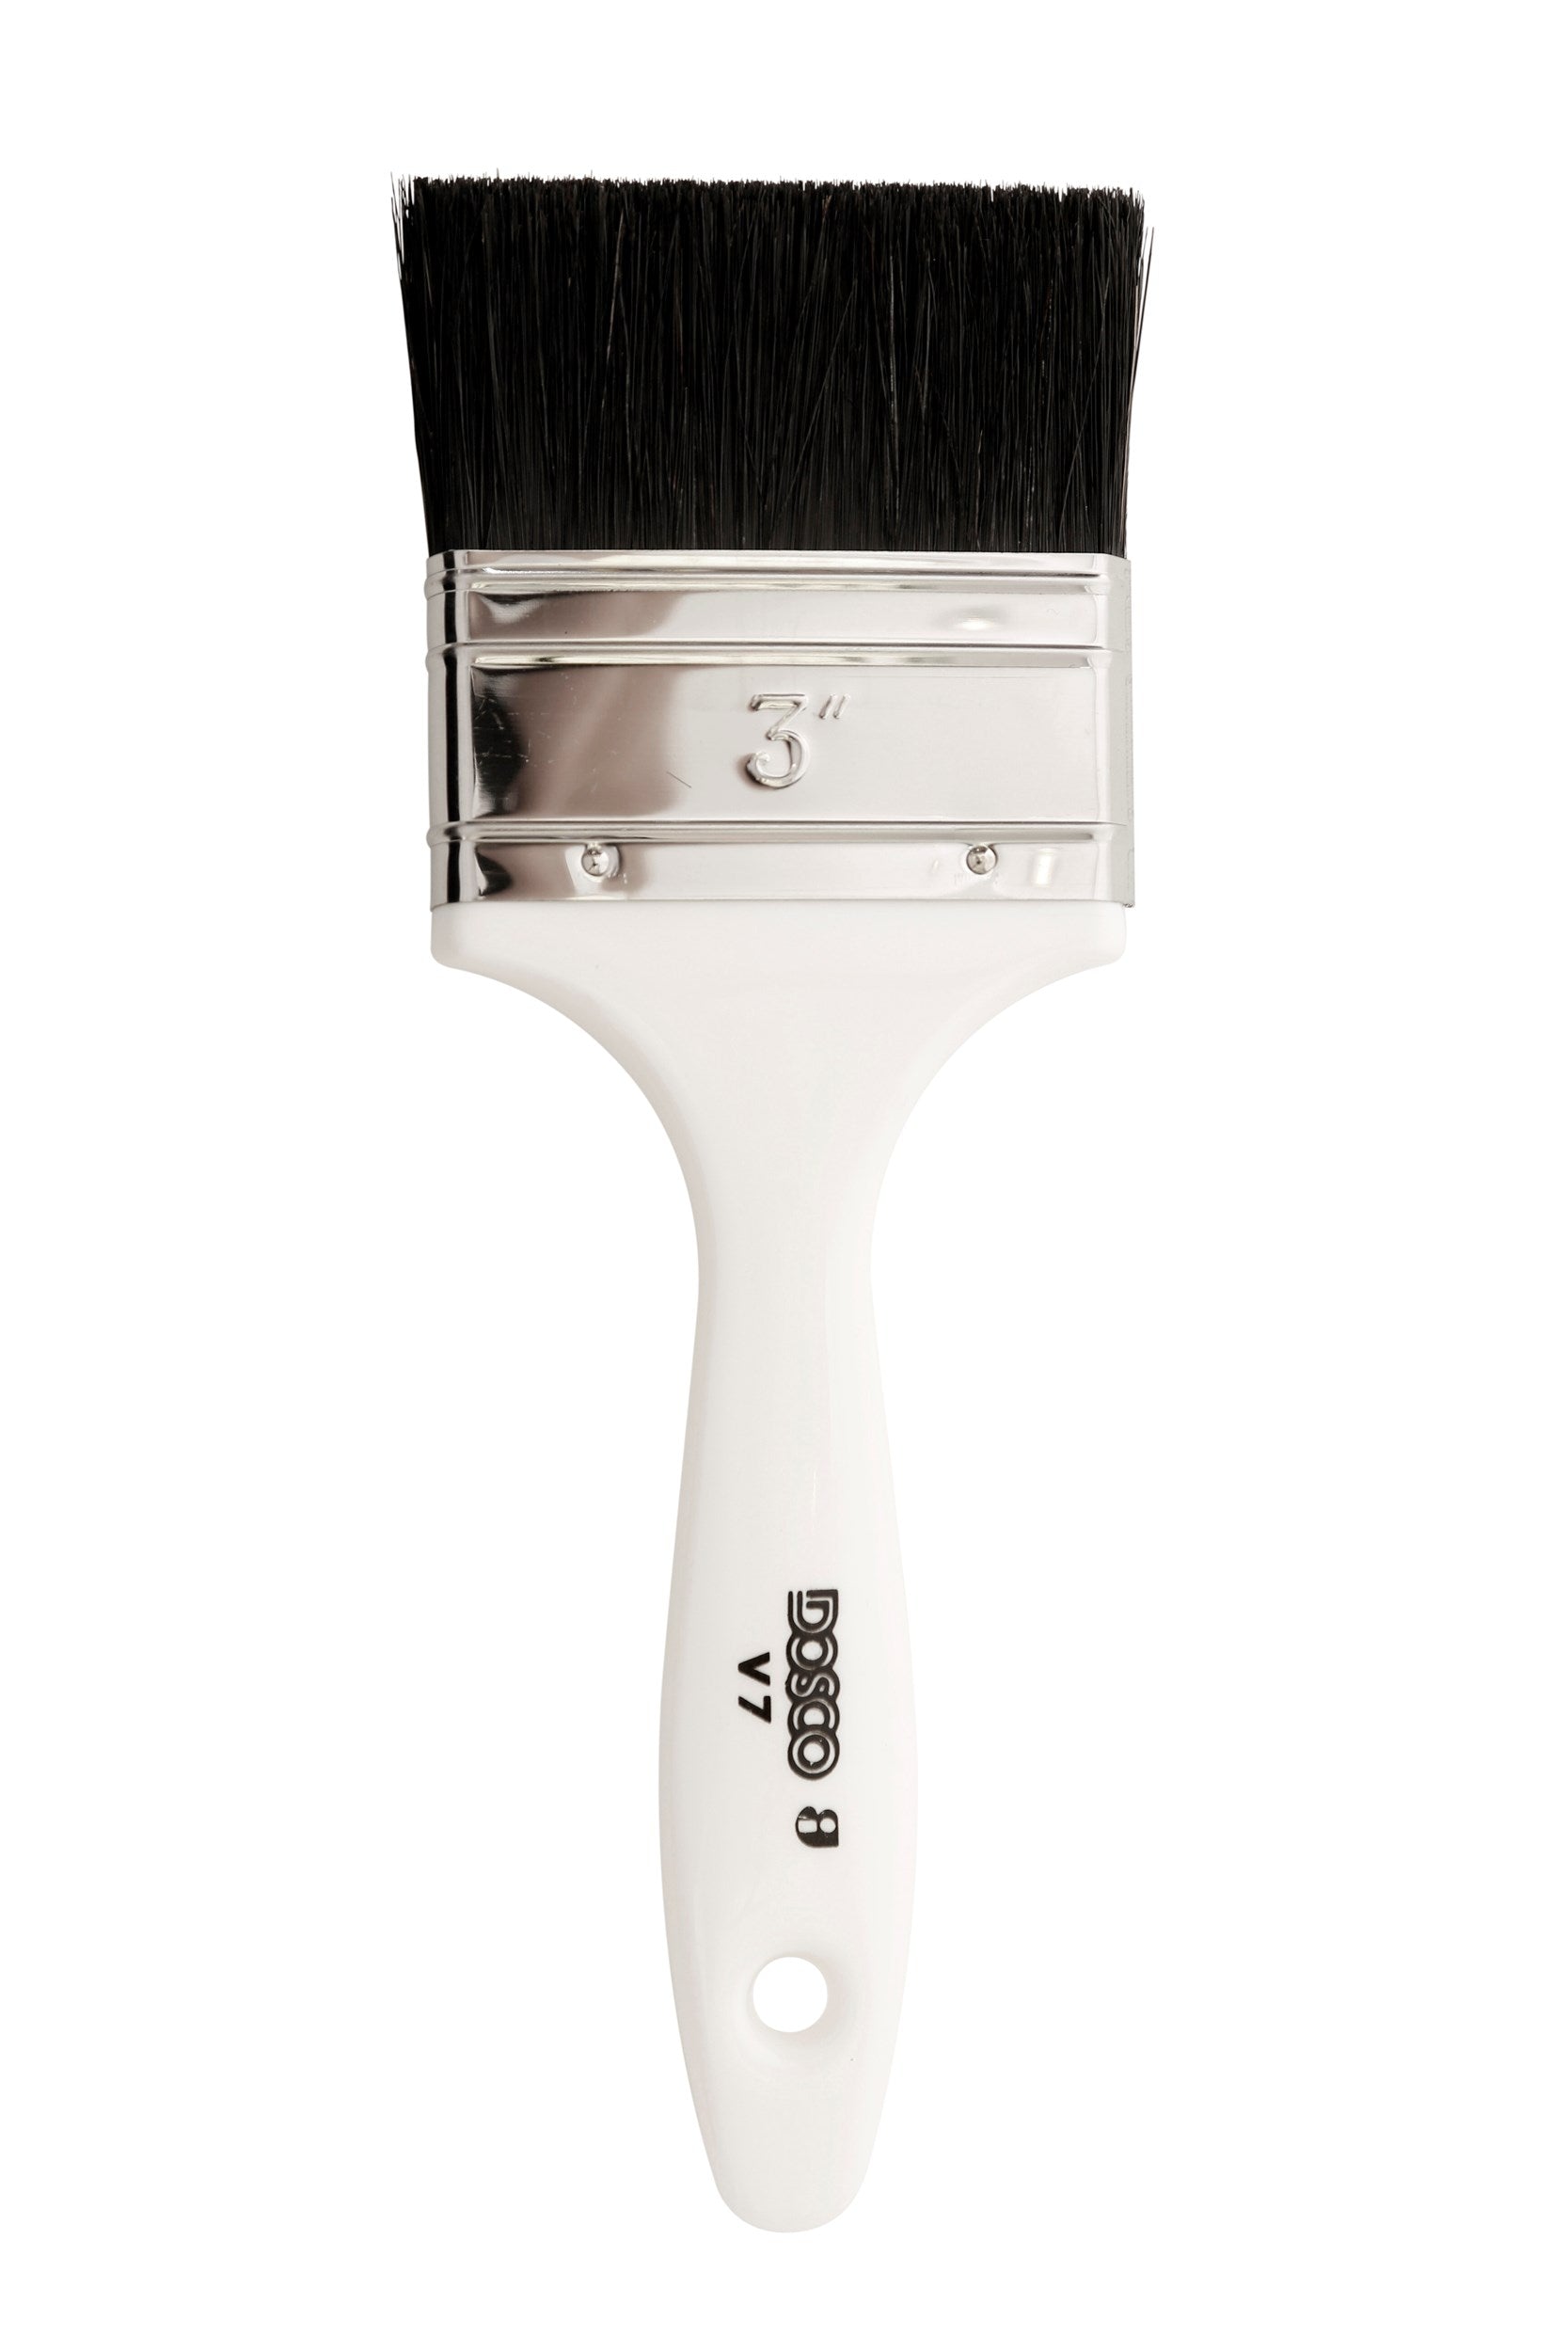 Paint & Decorating | DOSCO All Purpose V7 Paint Brush 3 inch by Weirs of Baggot St